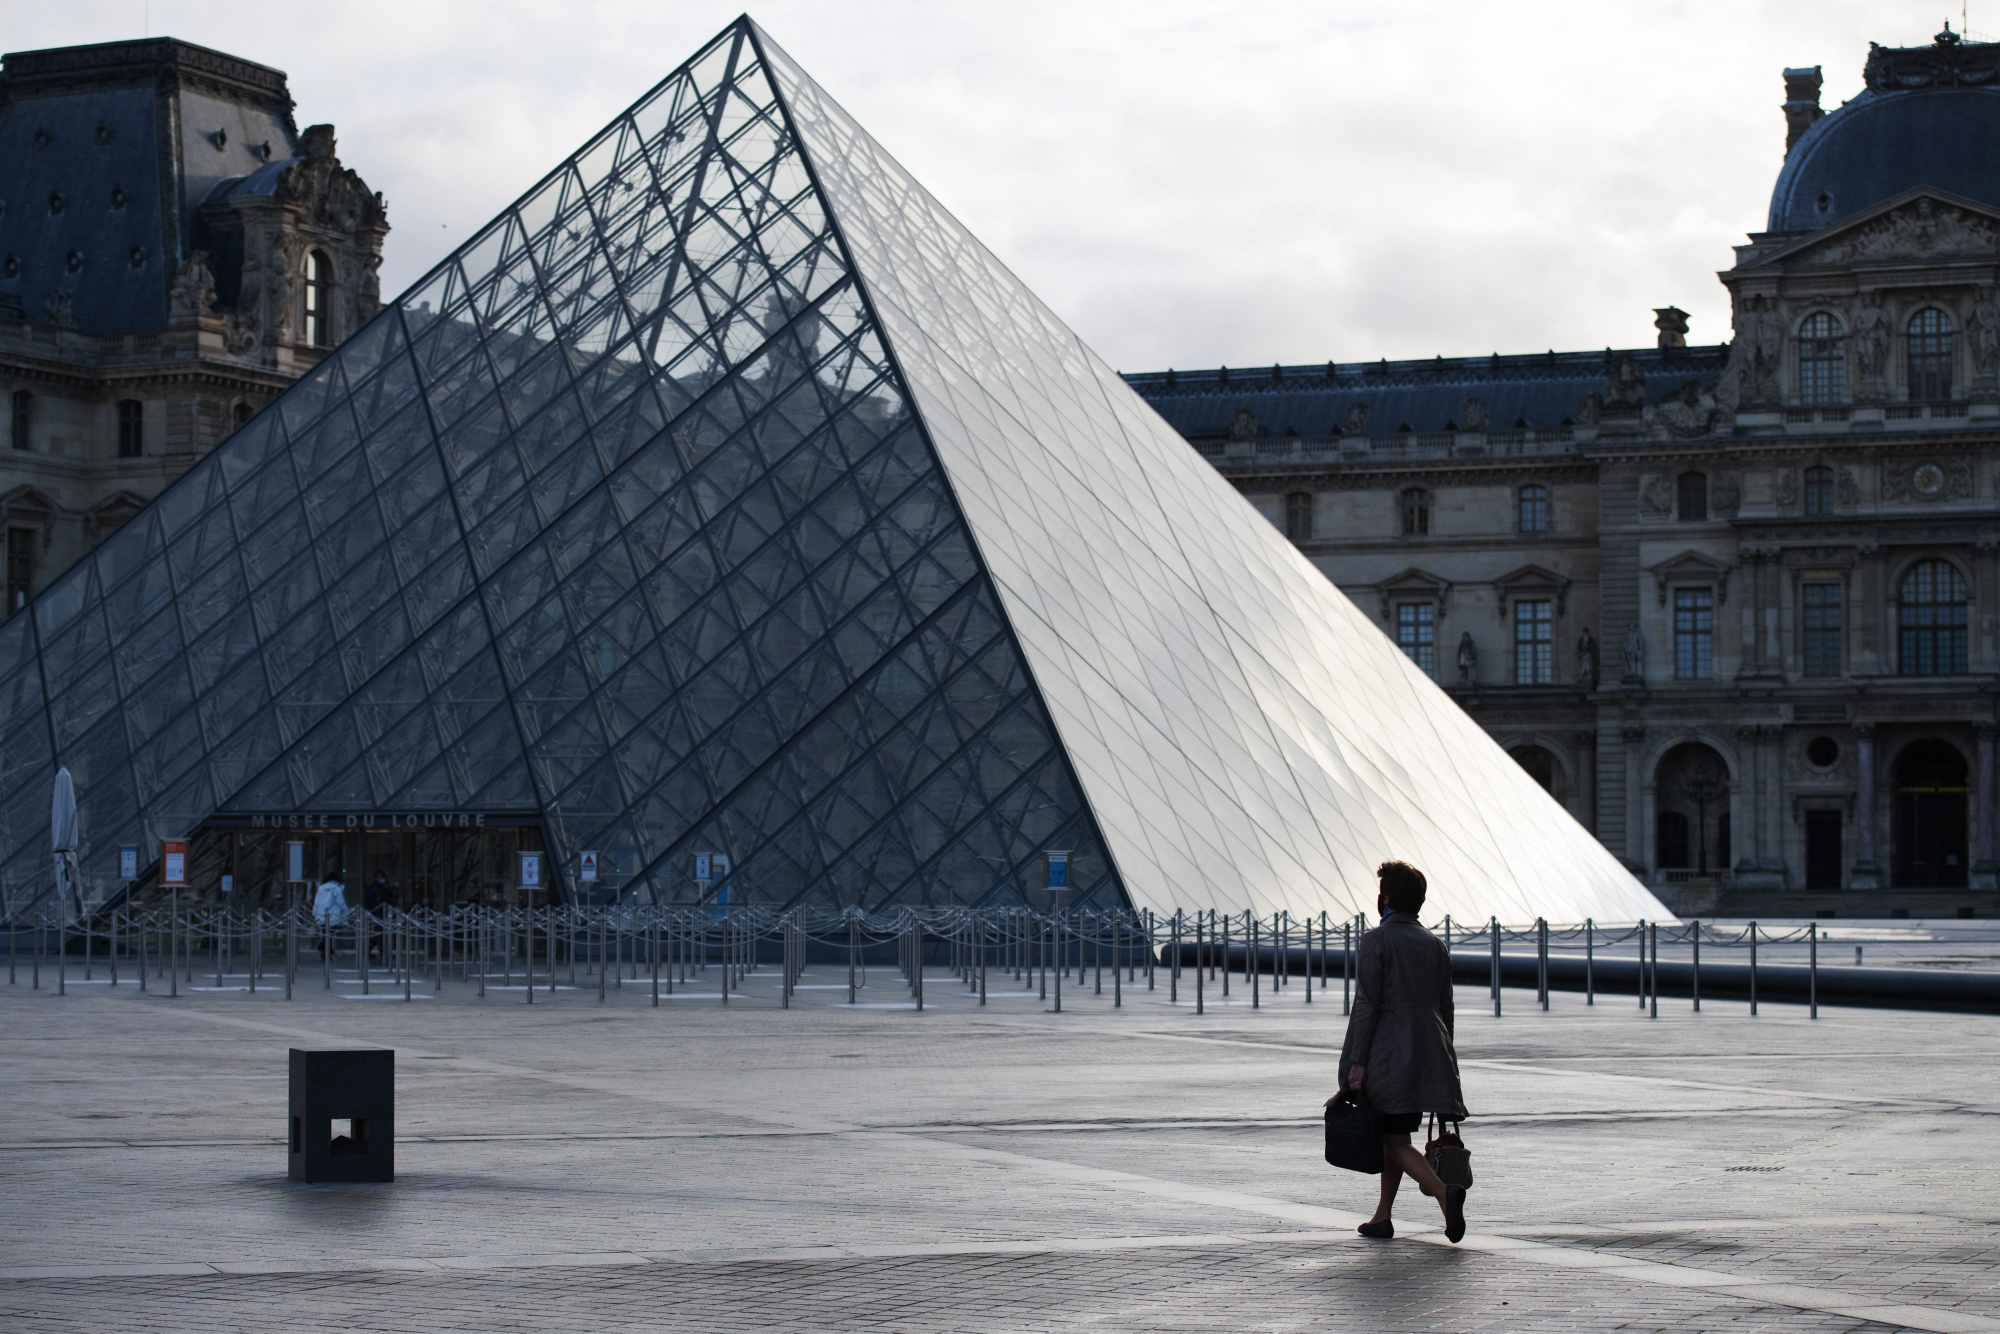 A pedestrian crosses the empty courtyard outside Louvre Museum during morning rush hour in Paris, France, on&nbsp;Nov. 2.&nbsp;